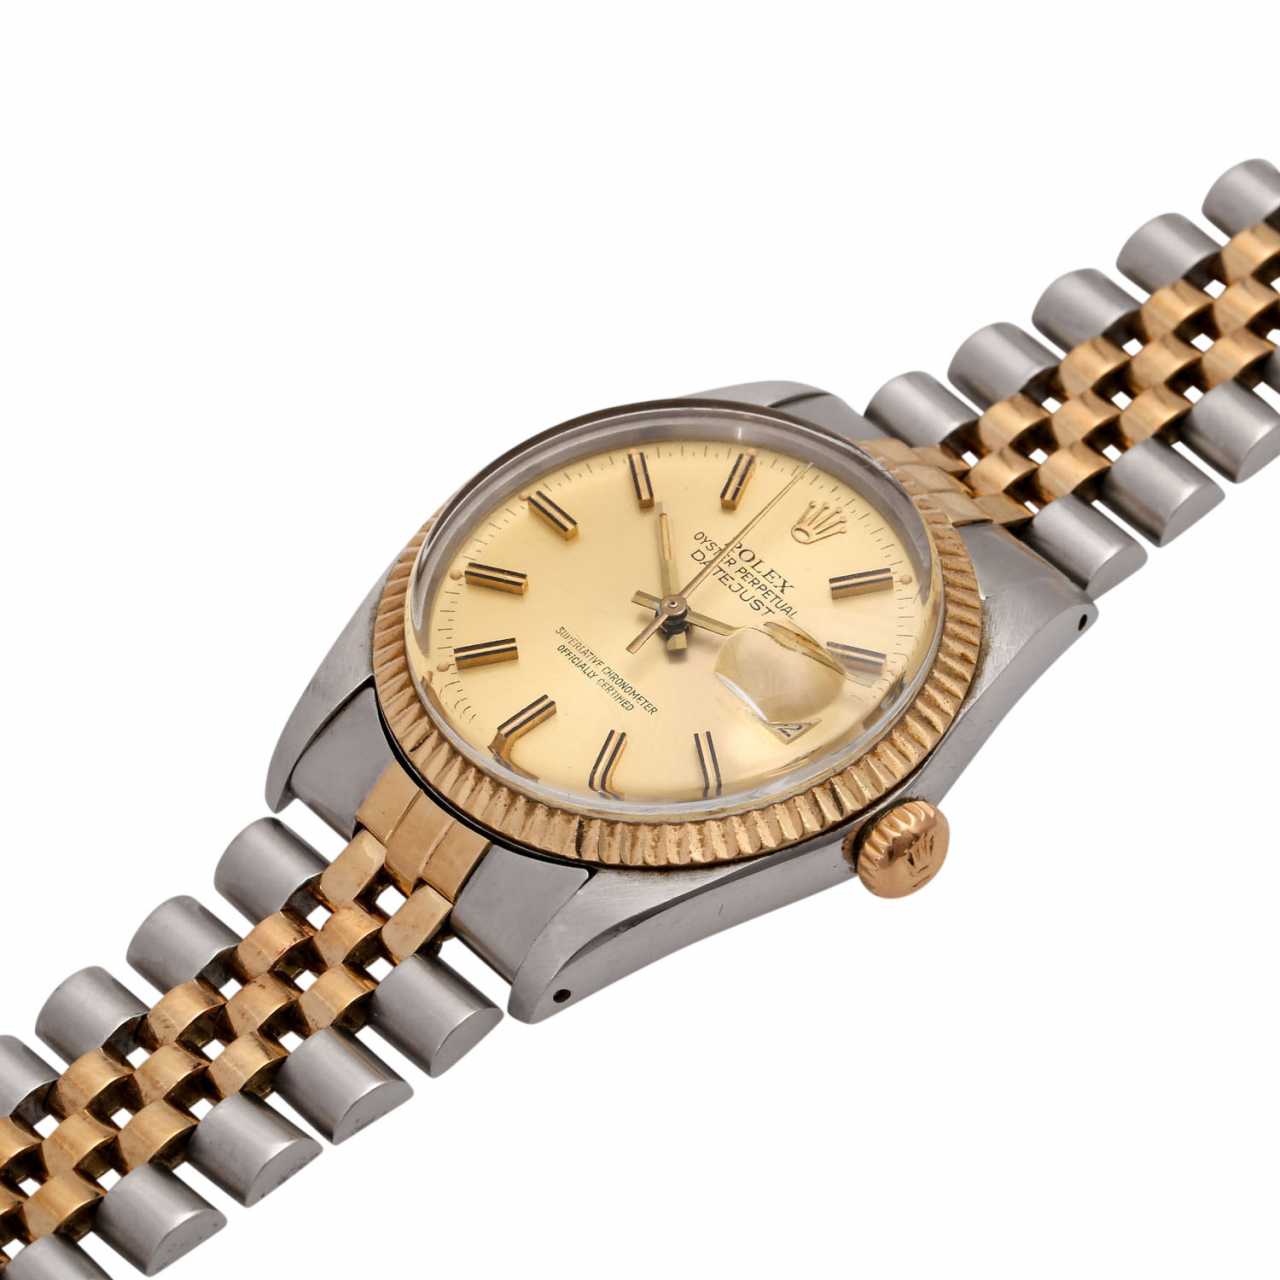 Auction: ROLEX Oyster perpetual Datejust men's watch, Ref. 16030, CA ...